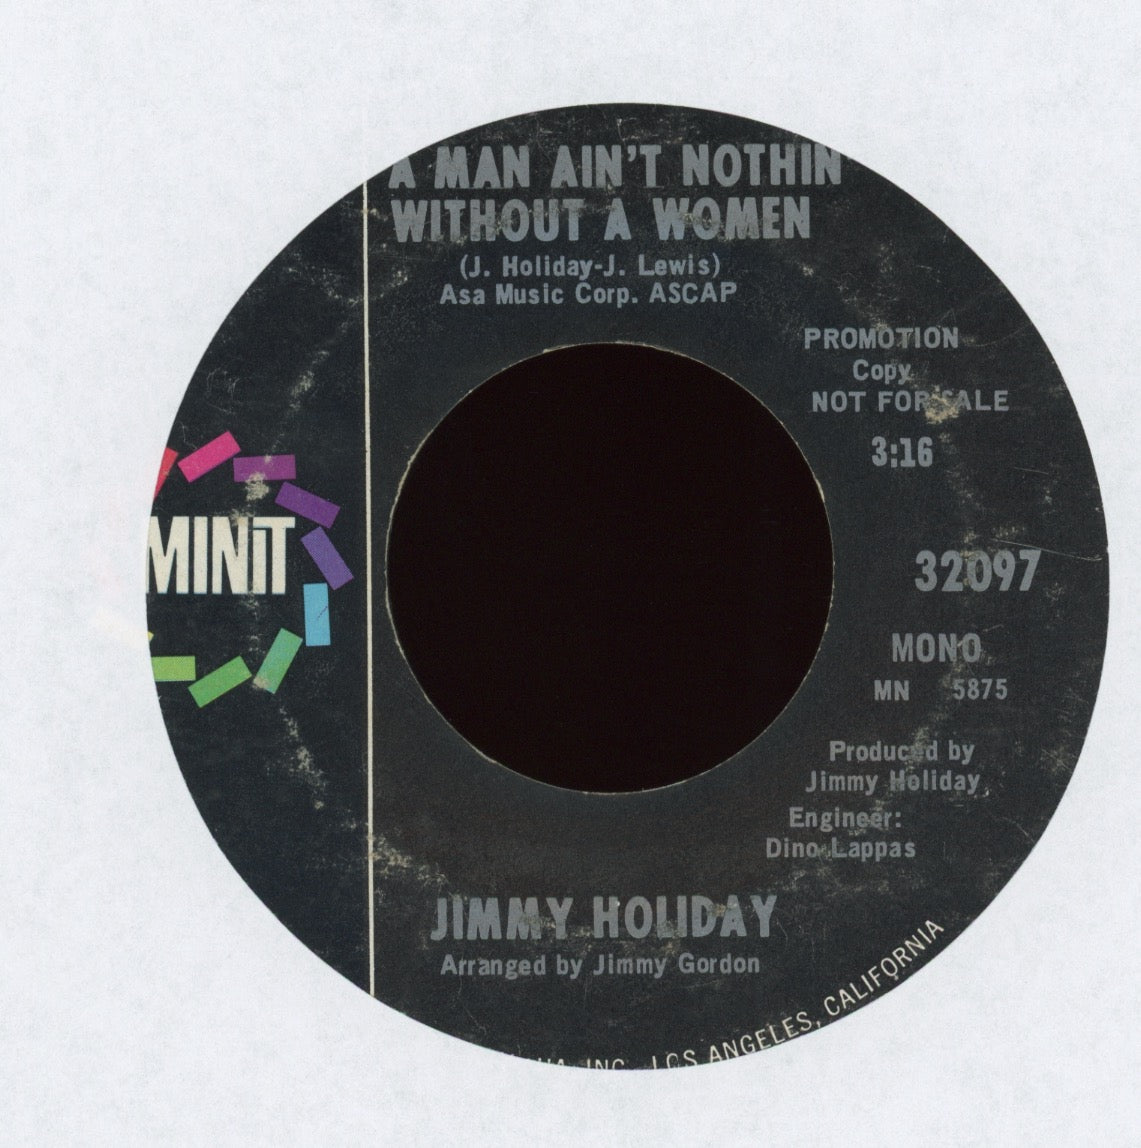 Jimmy Holiday - A Man Ain't Nothing Without A Women on Minit